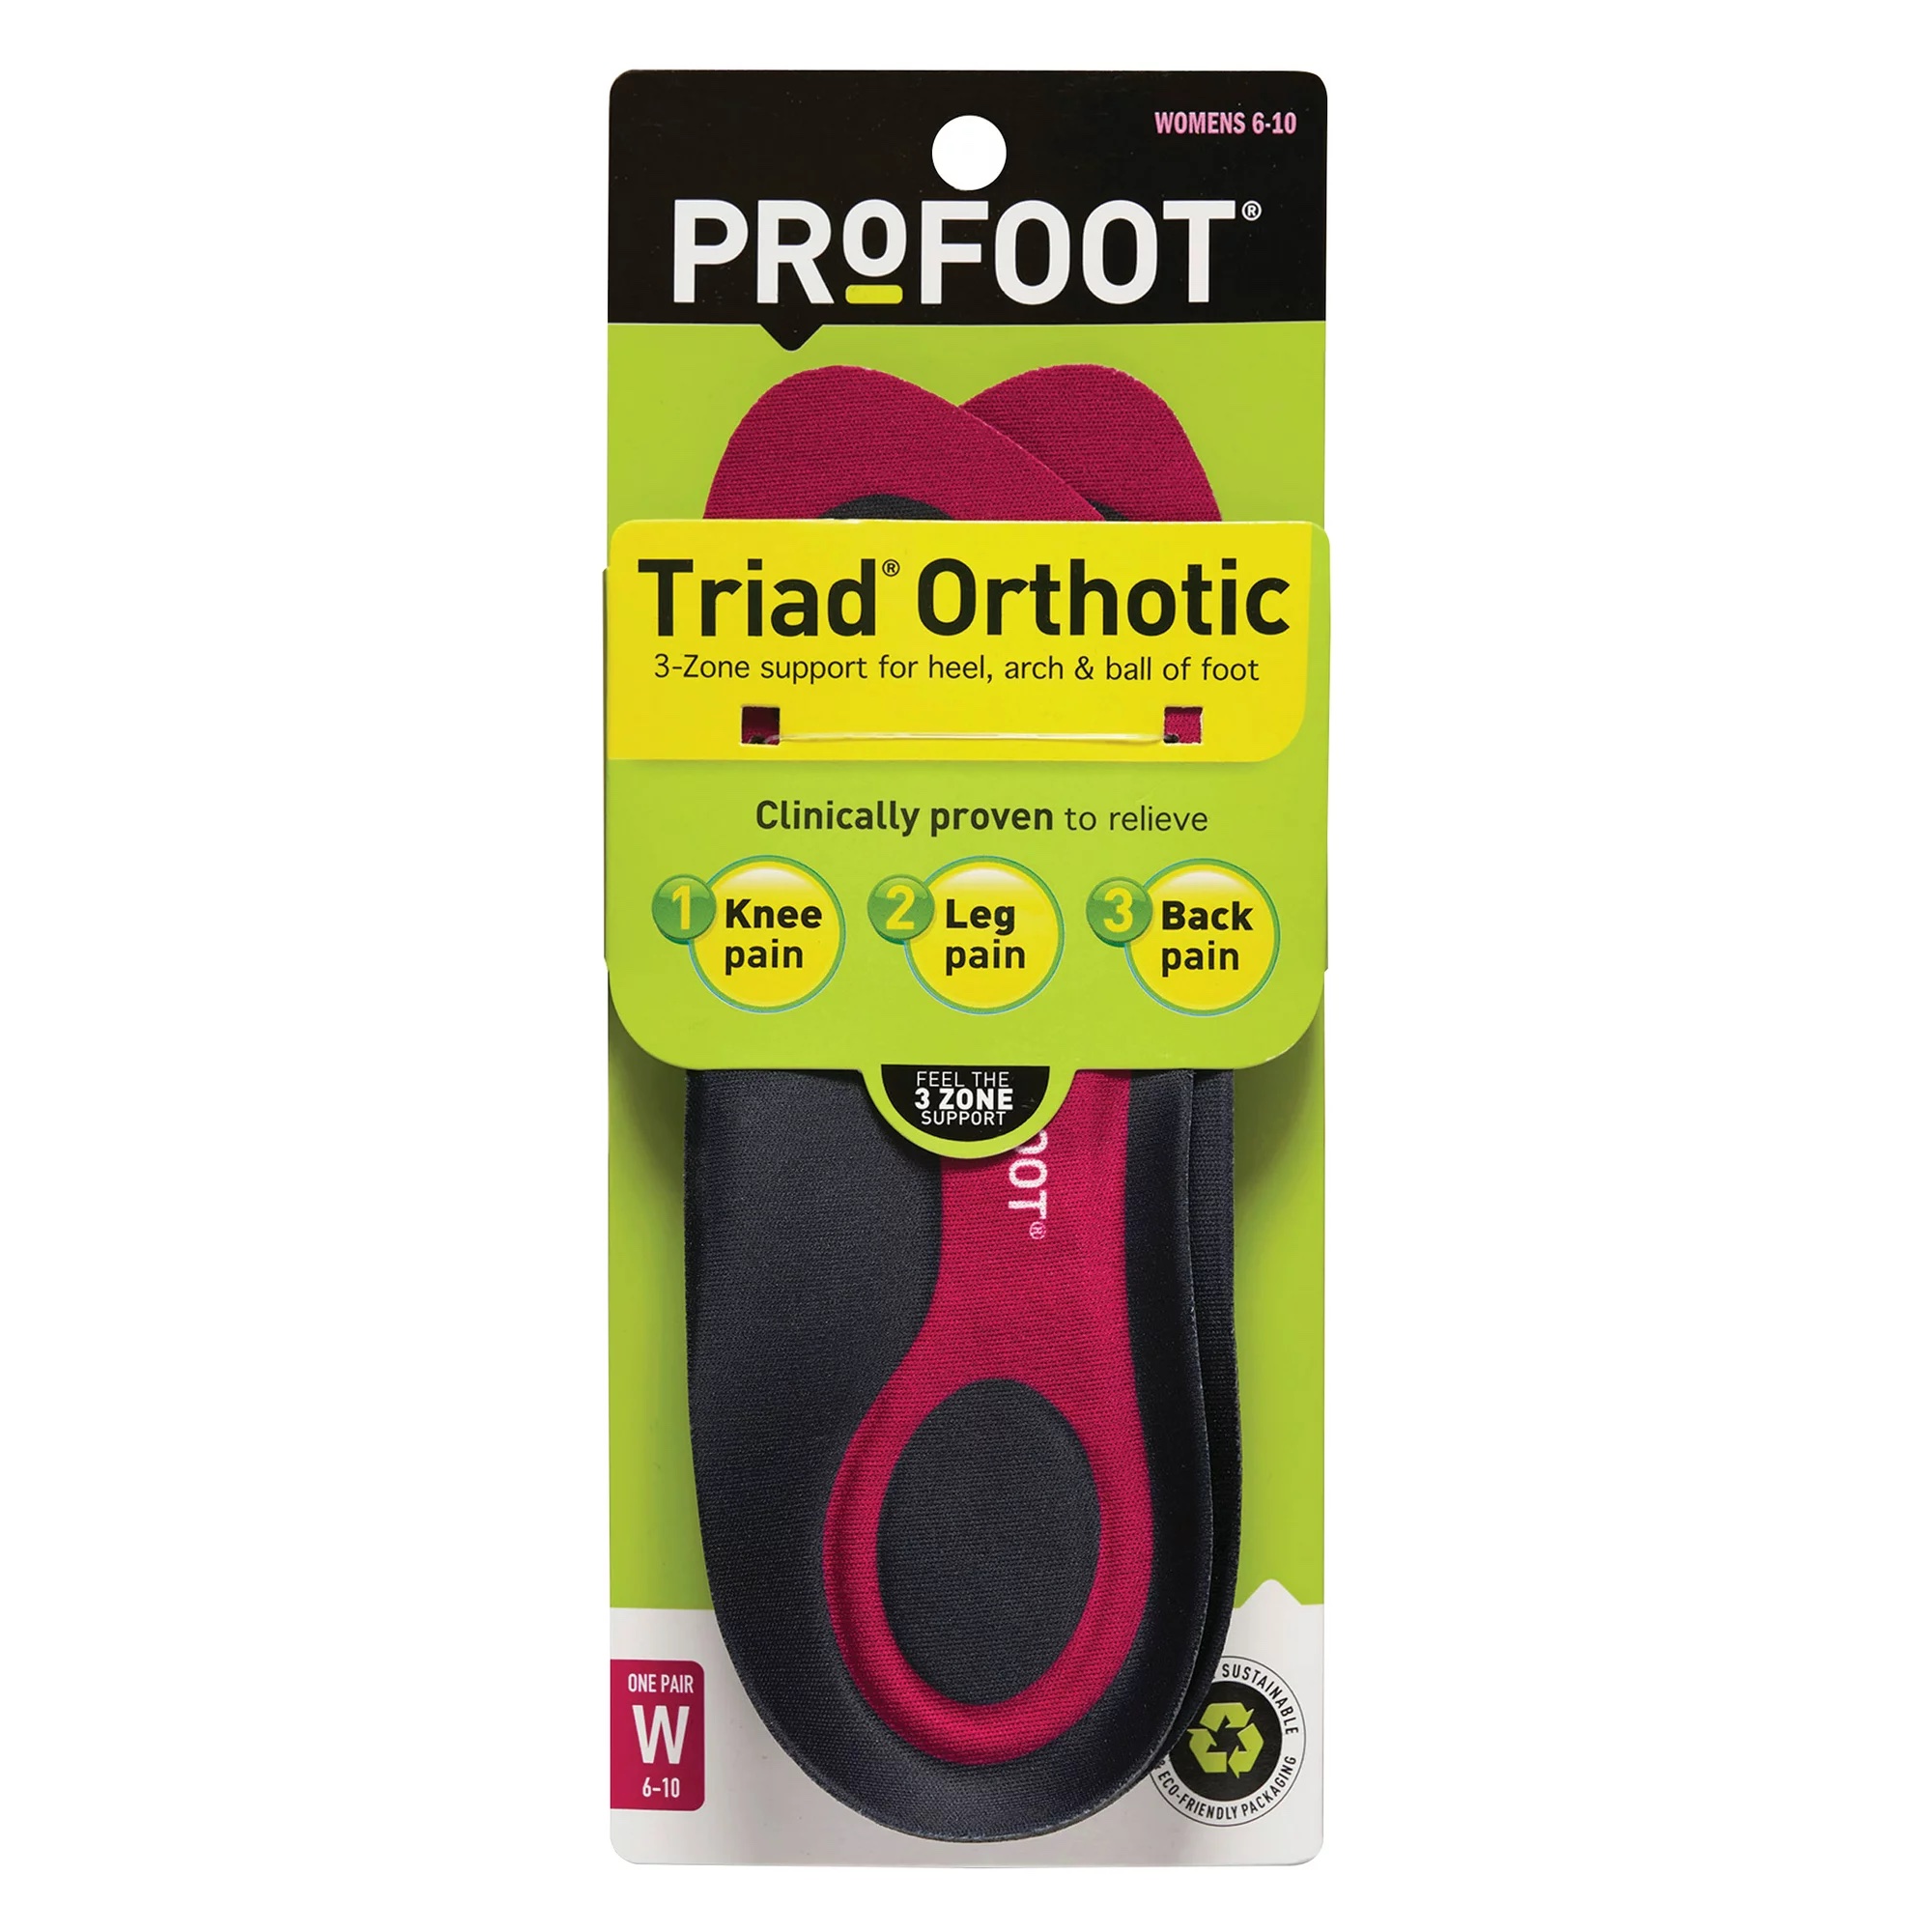 PROFOOT Triad Orthotic Insoles for Knee, Leg & Back Pain